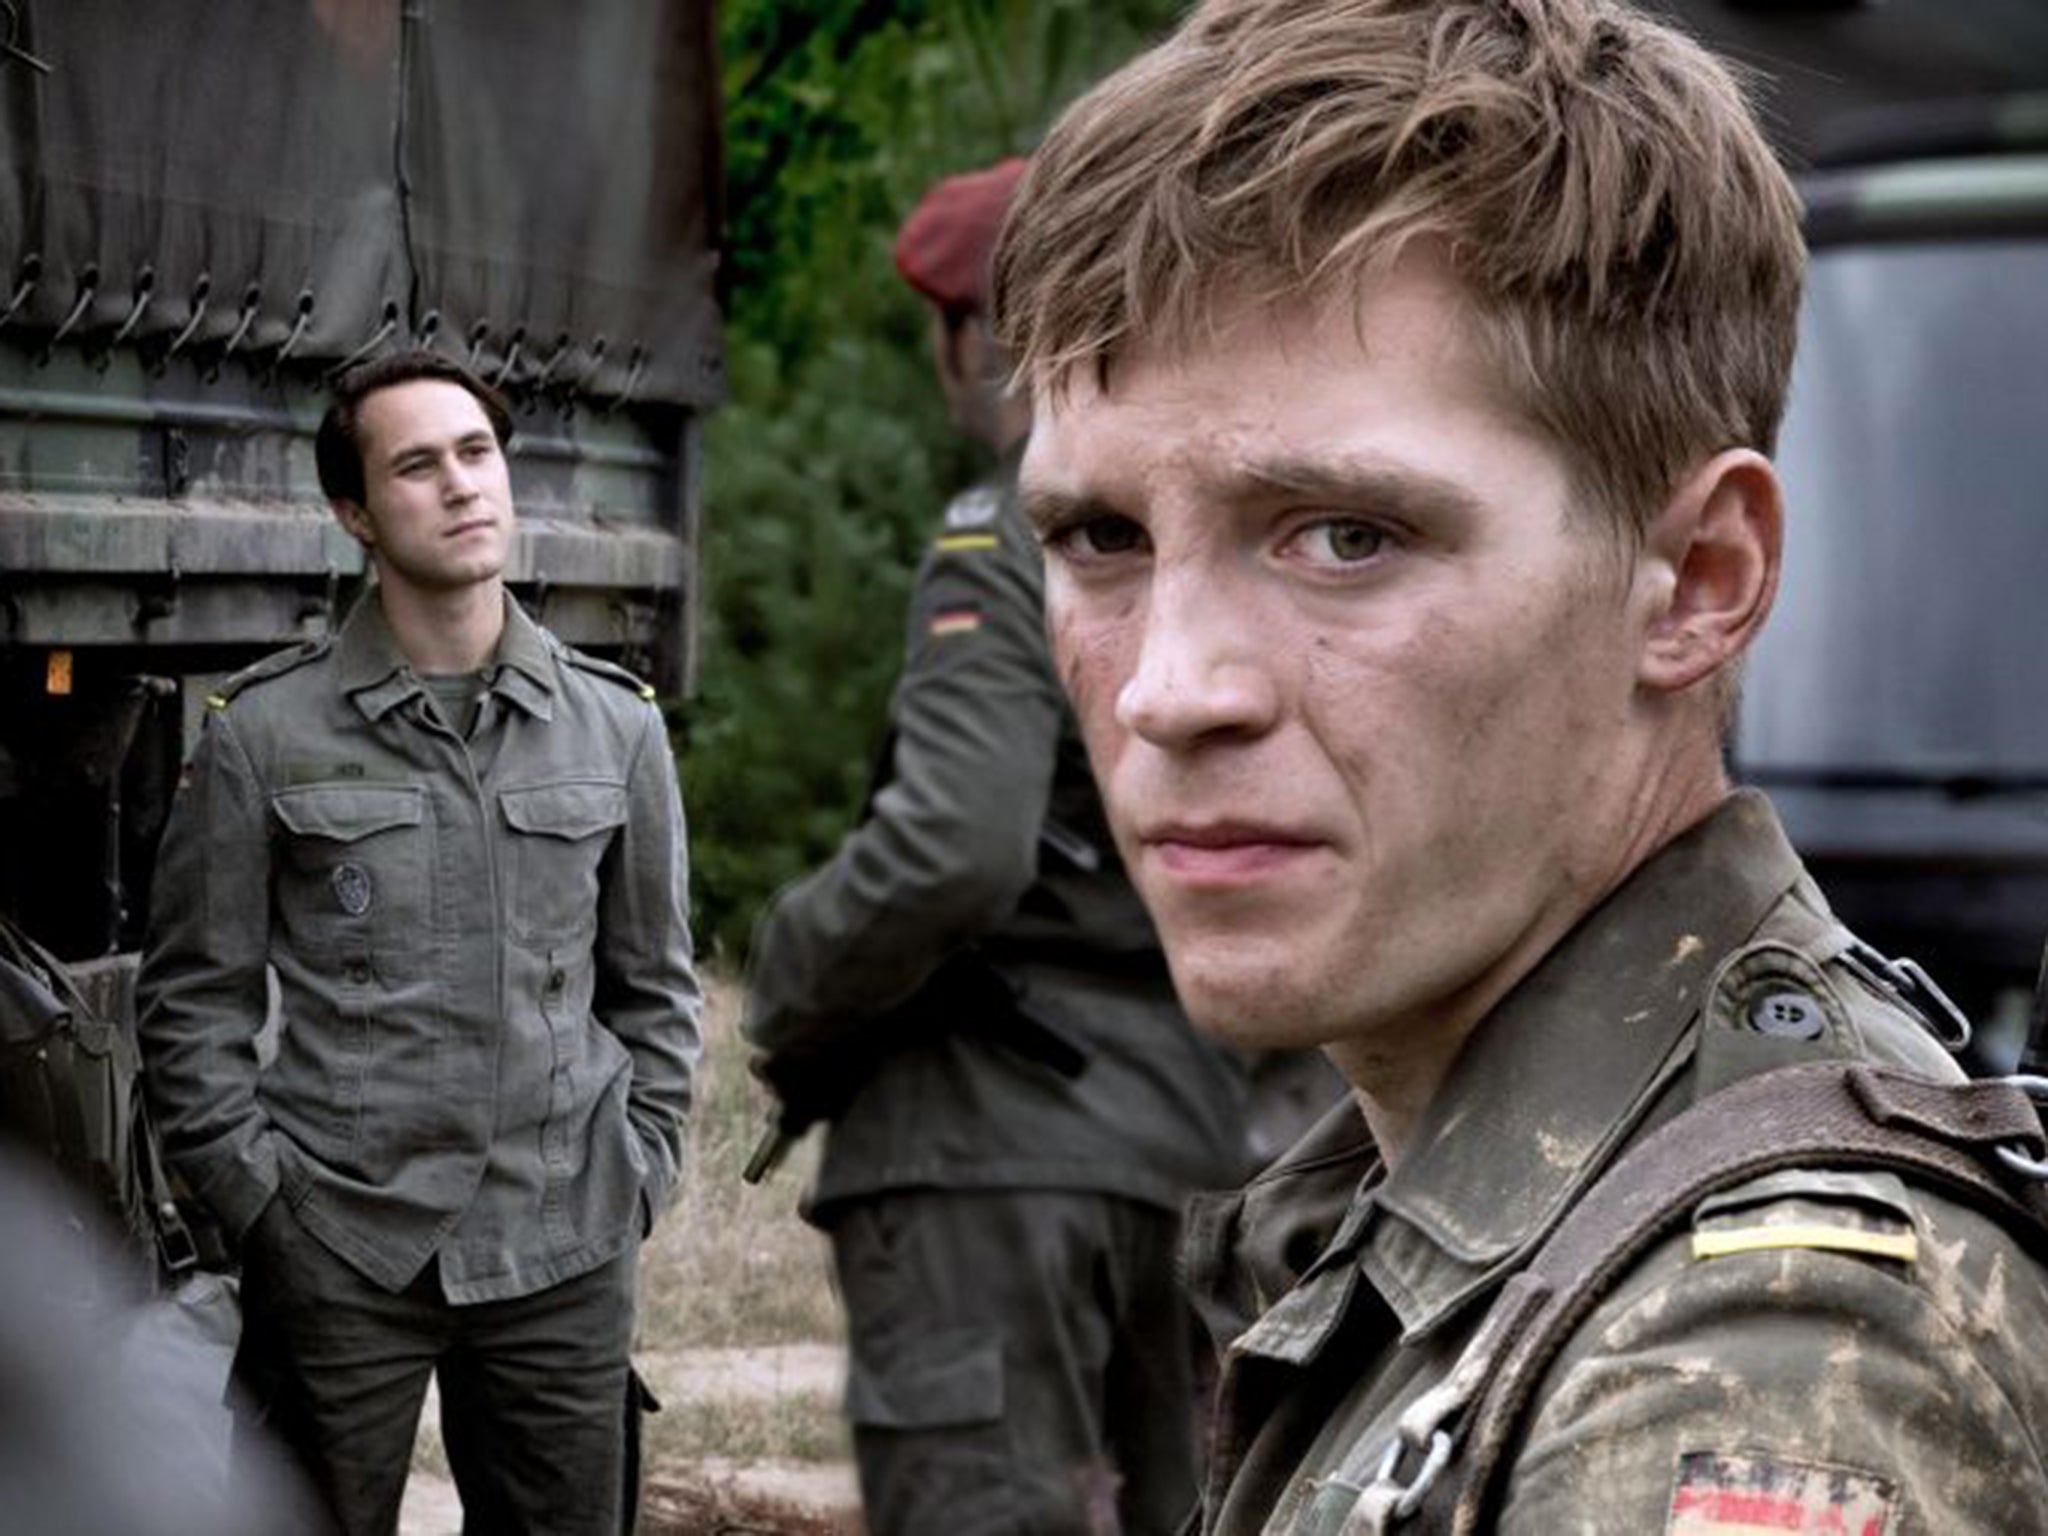 German spy drama deutschland 83 could take over our screens this year